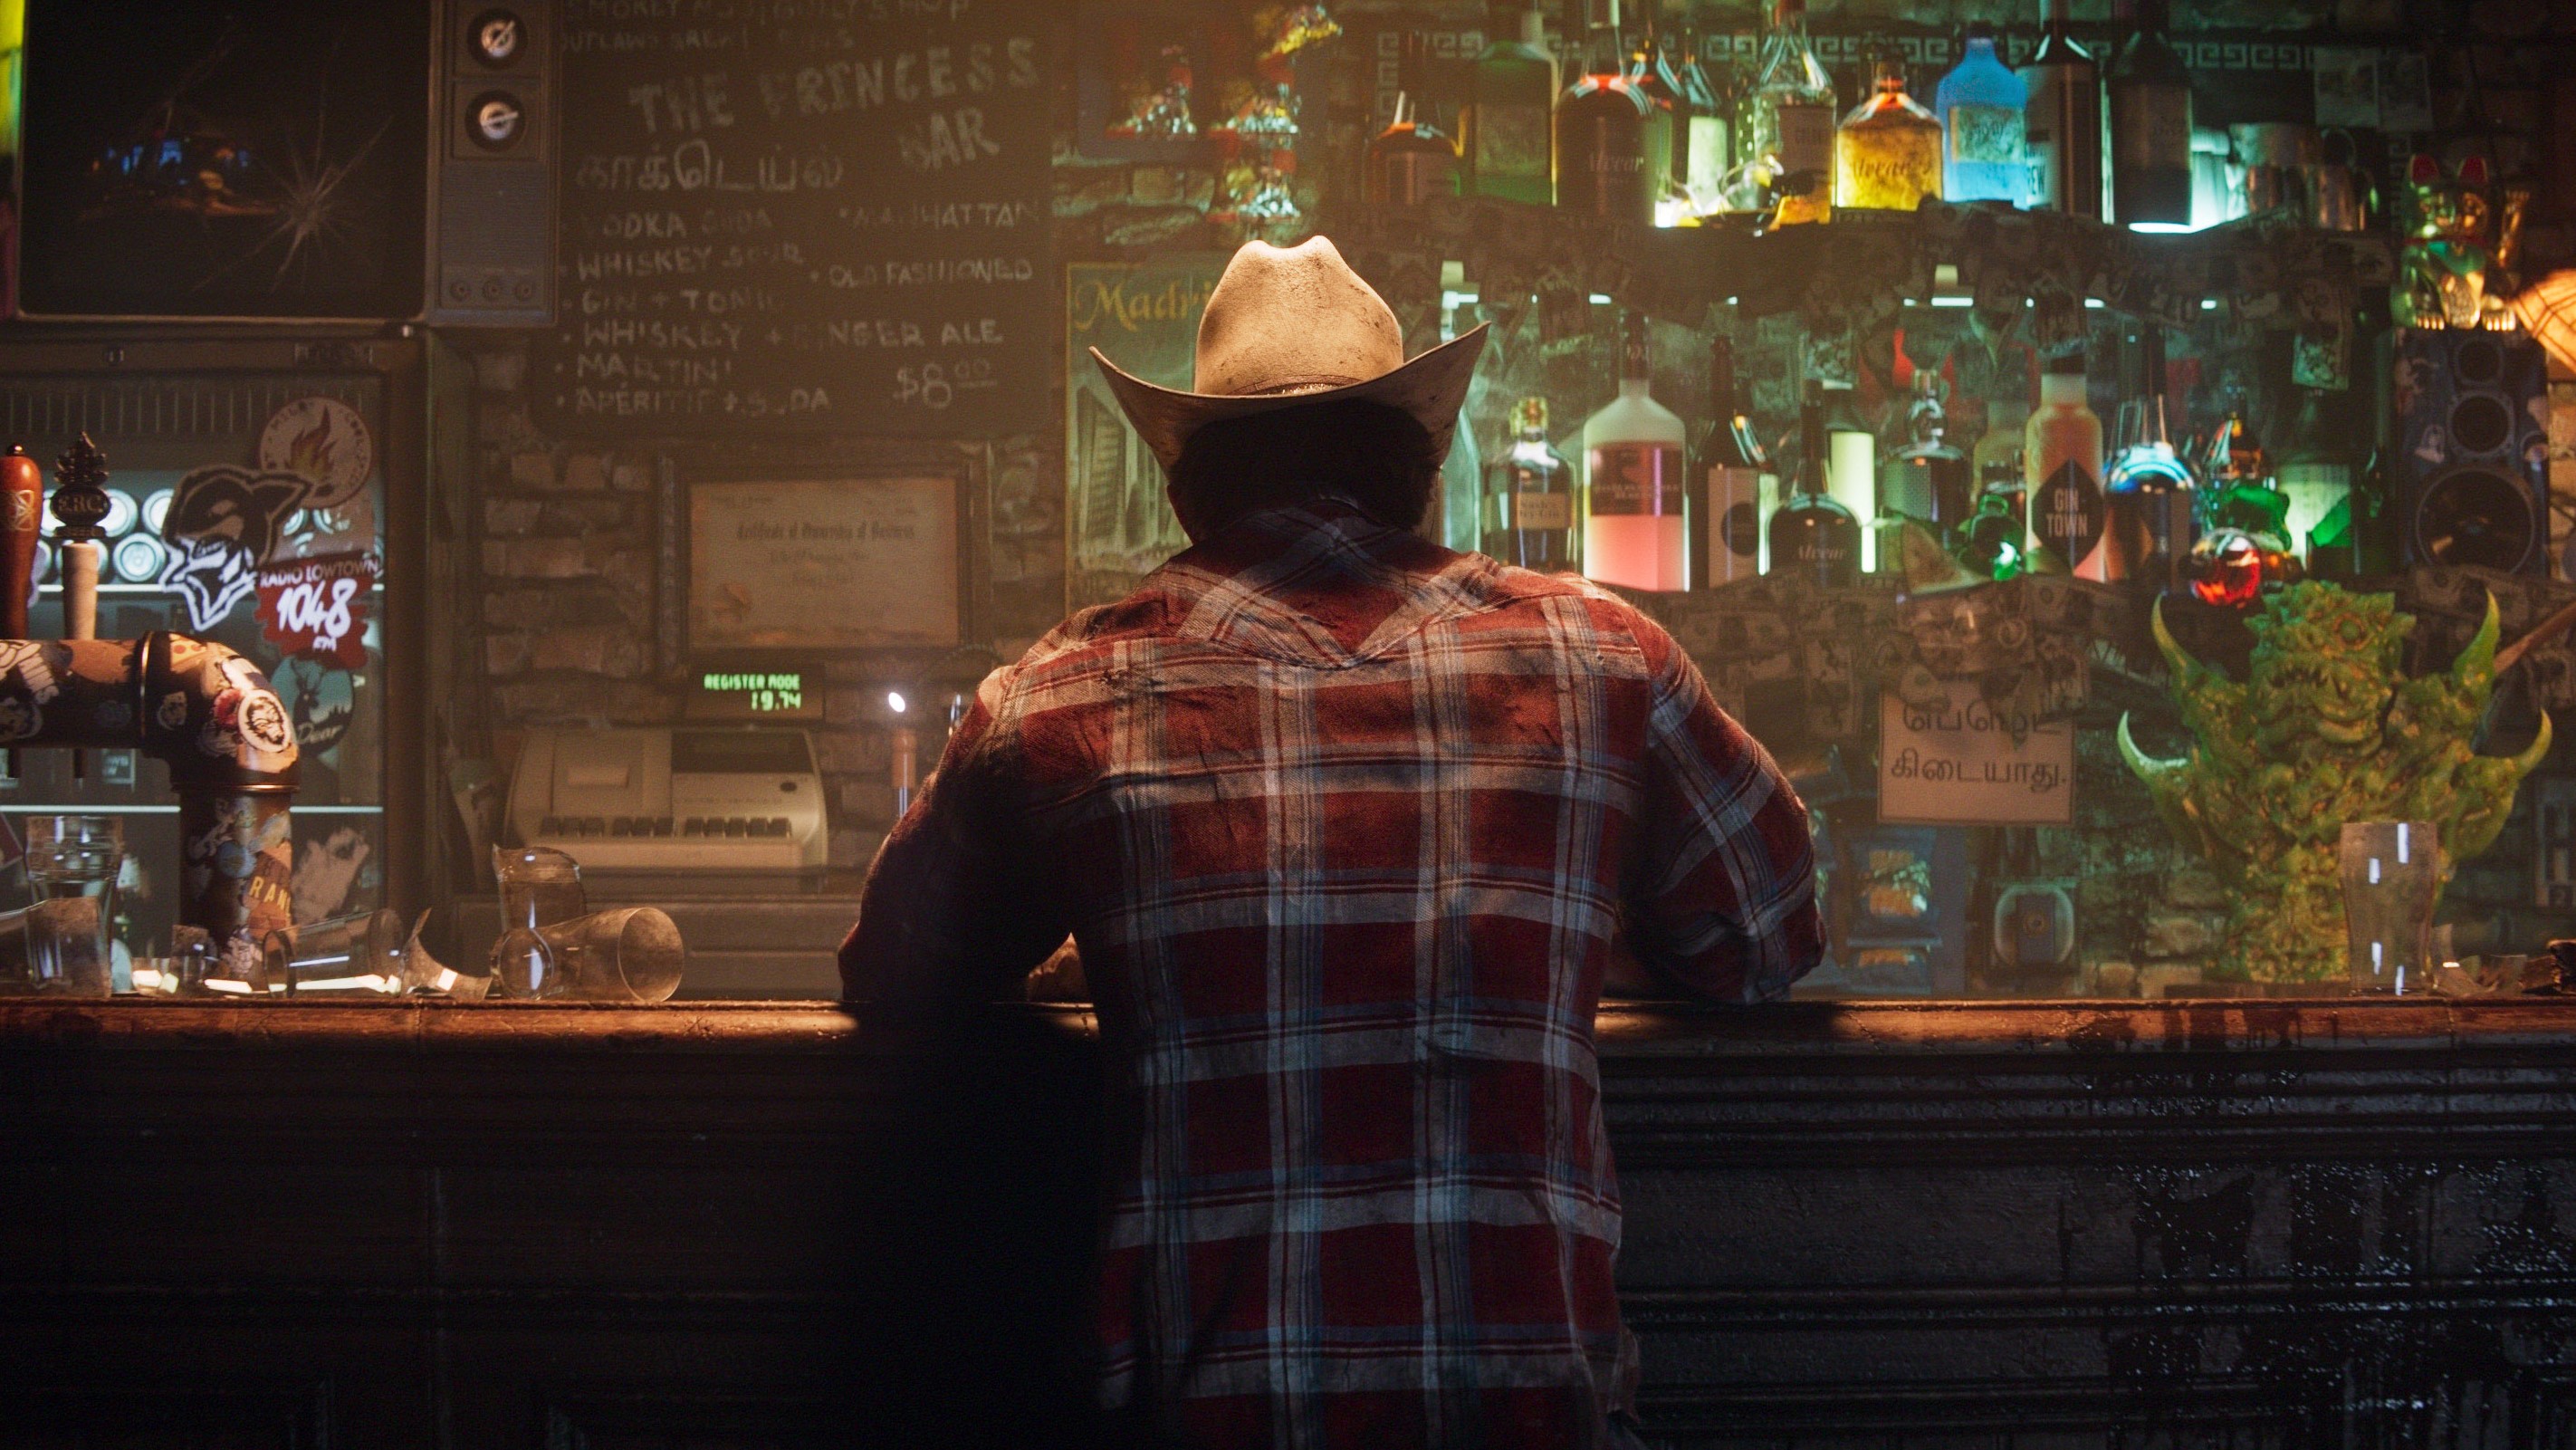 Wolverine sitting in a bar, his back is facing the screen